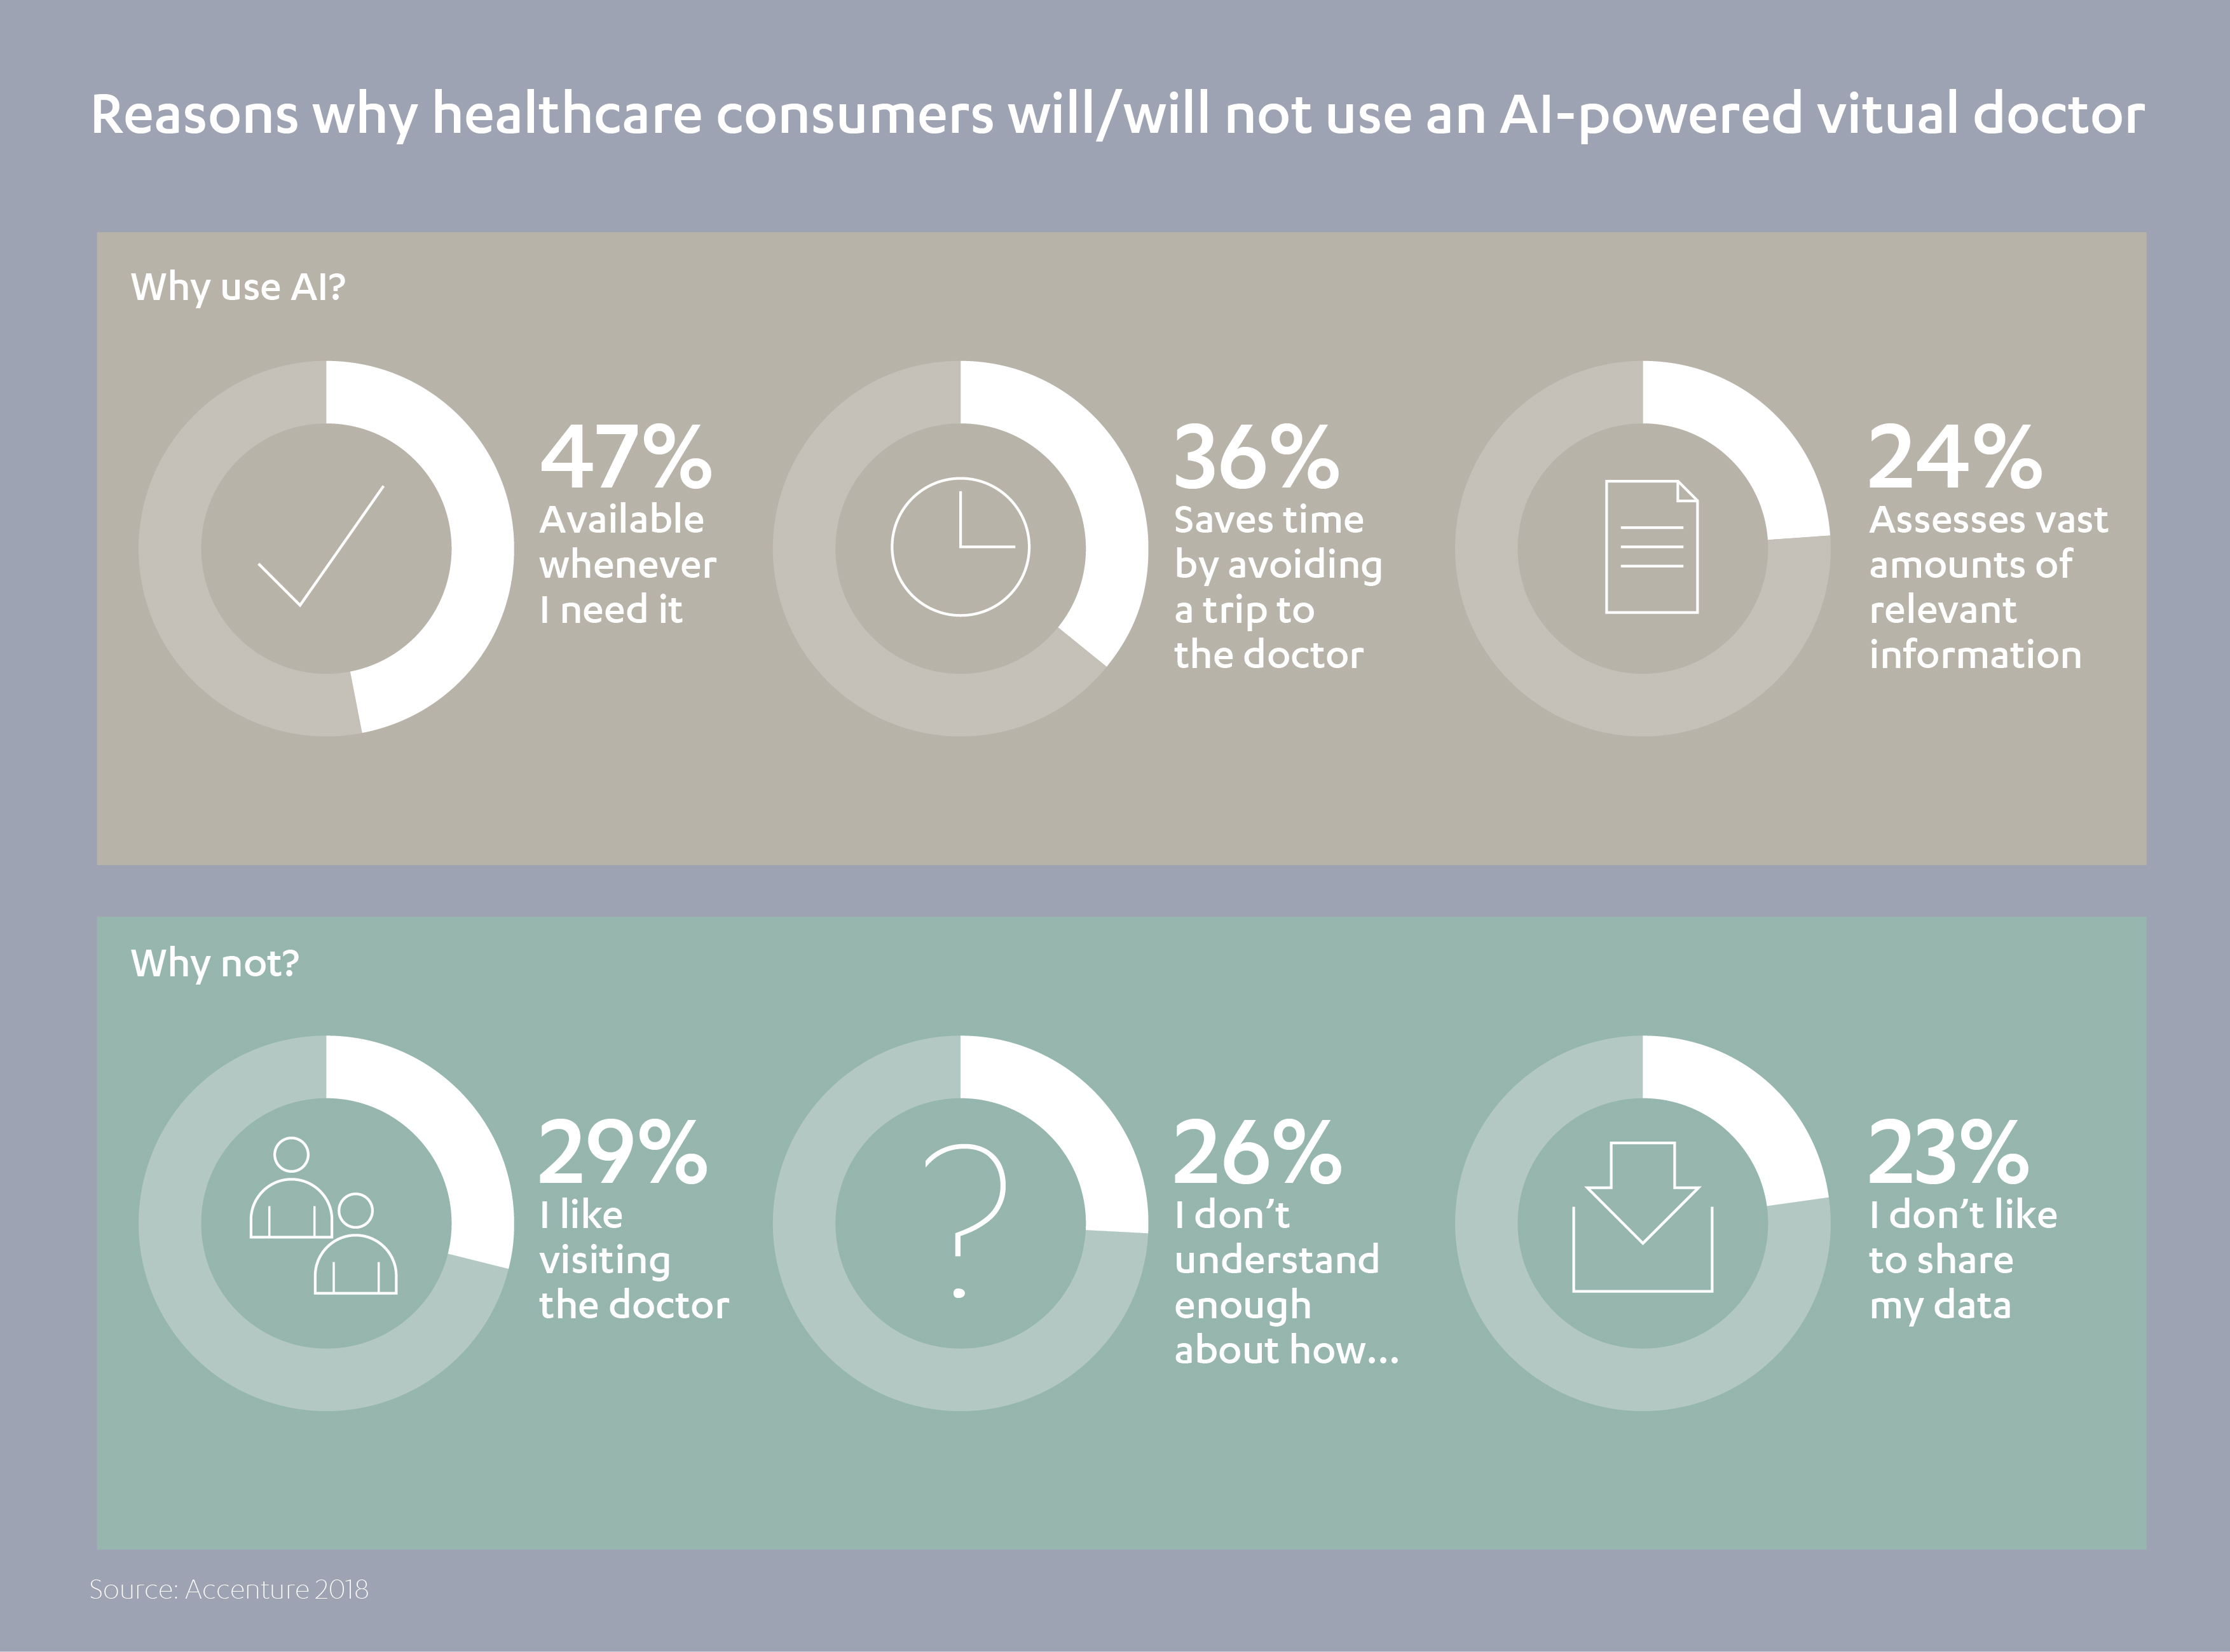 Reasons why healthcare consumers will or will not use AI powered virtual doctor